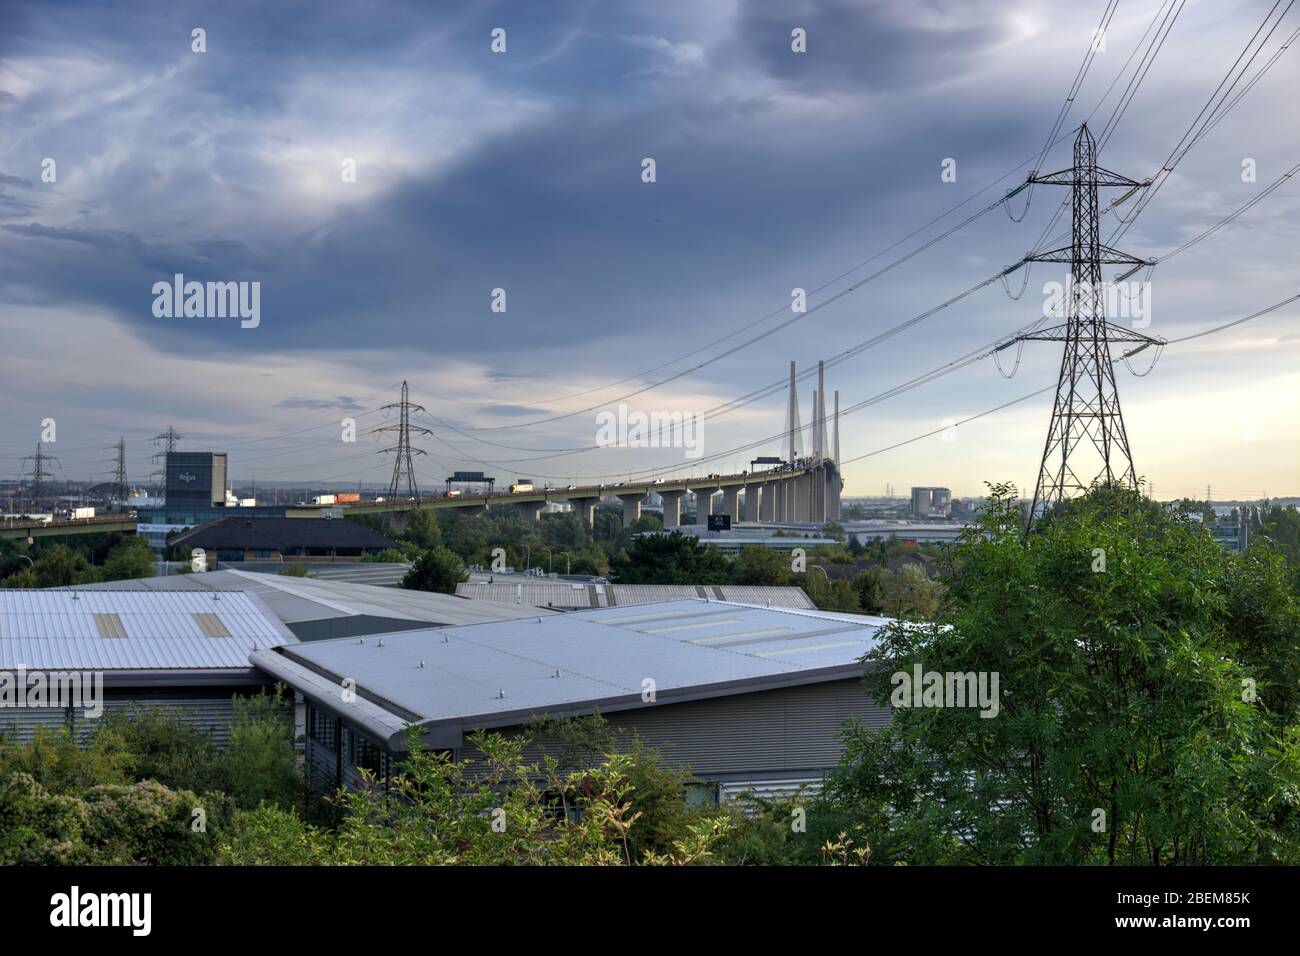 Dartford, United Kingdom - August 30, 2019: Industrial units and electricity pylons with Dartford Bridge over River Thames in background Stock Photo